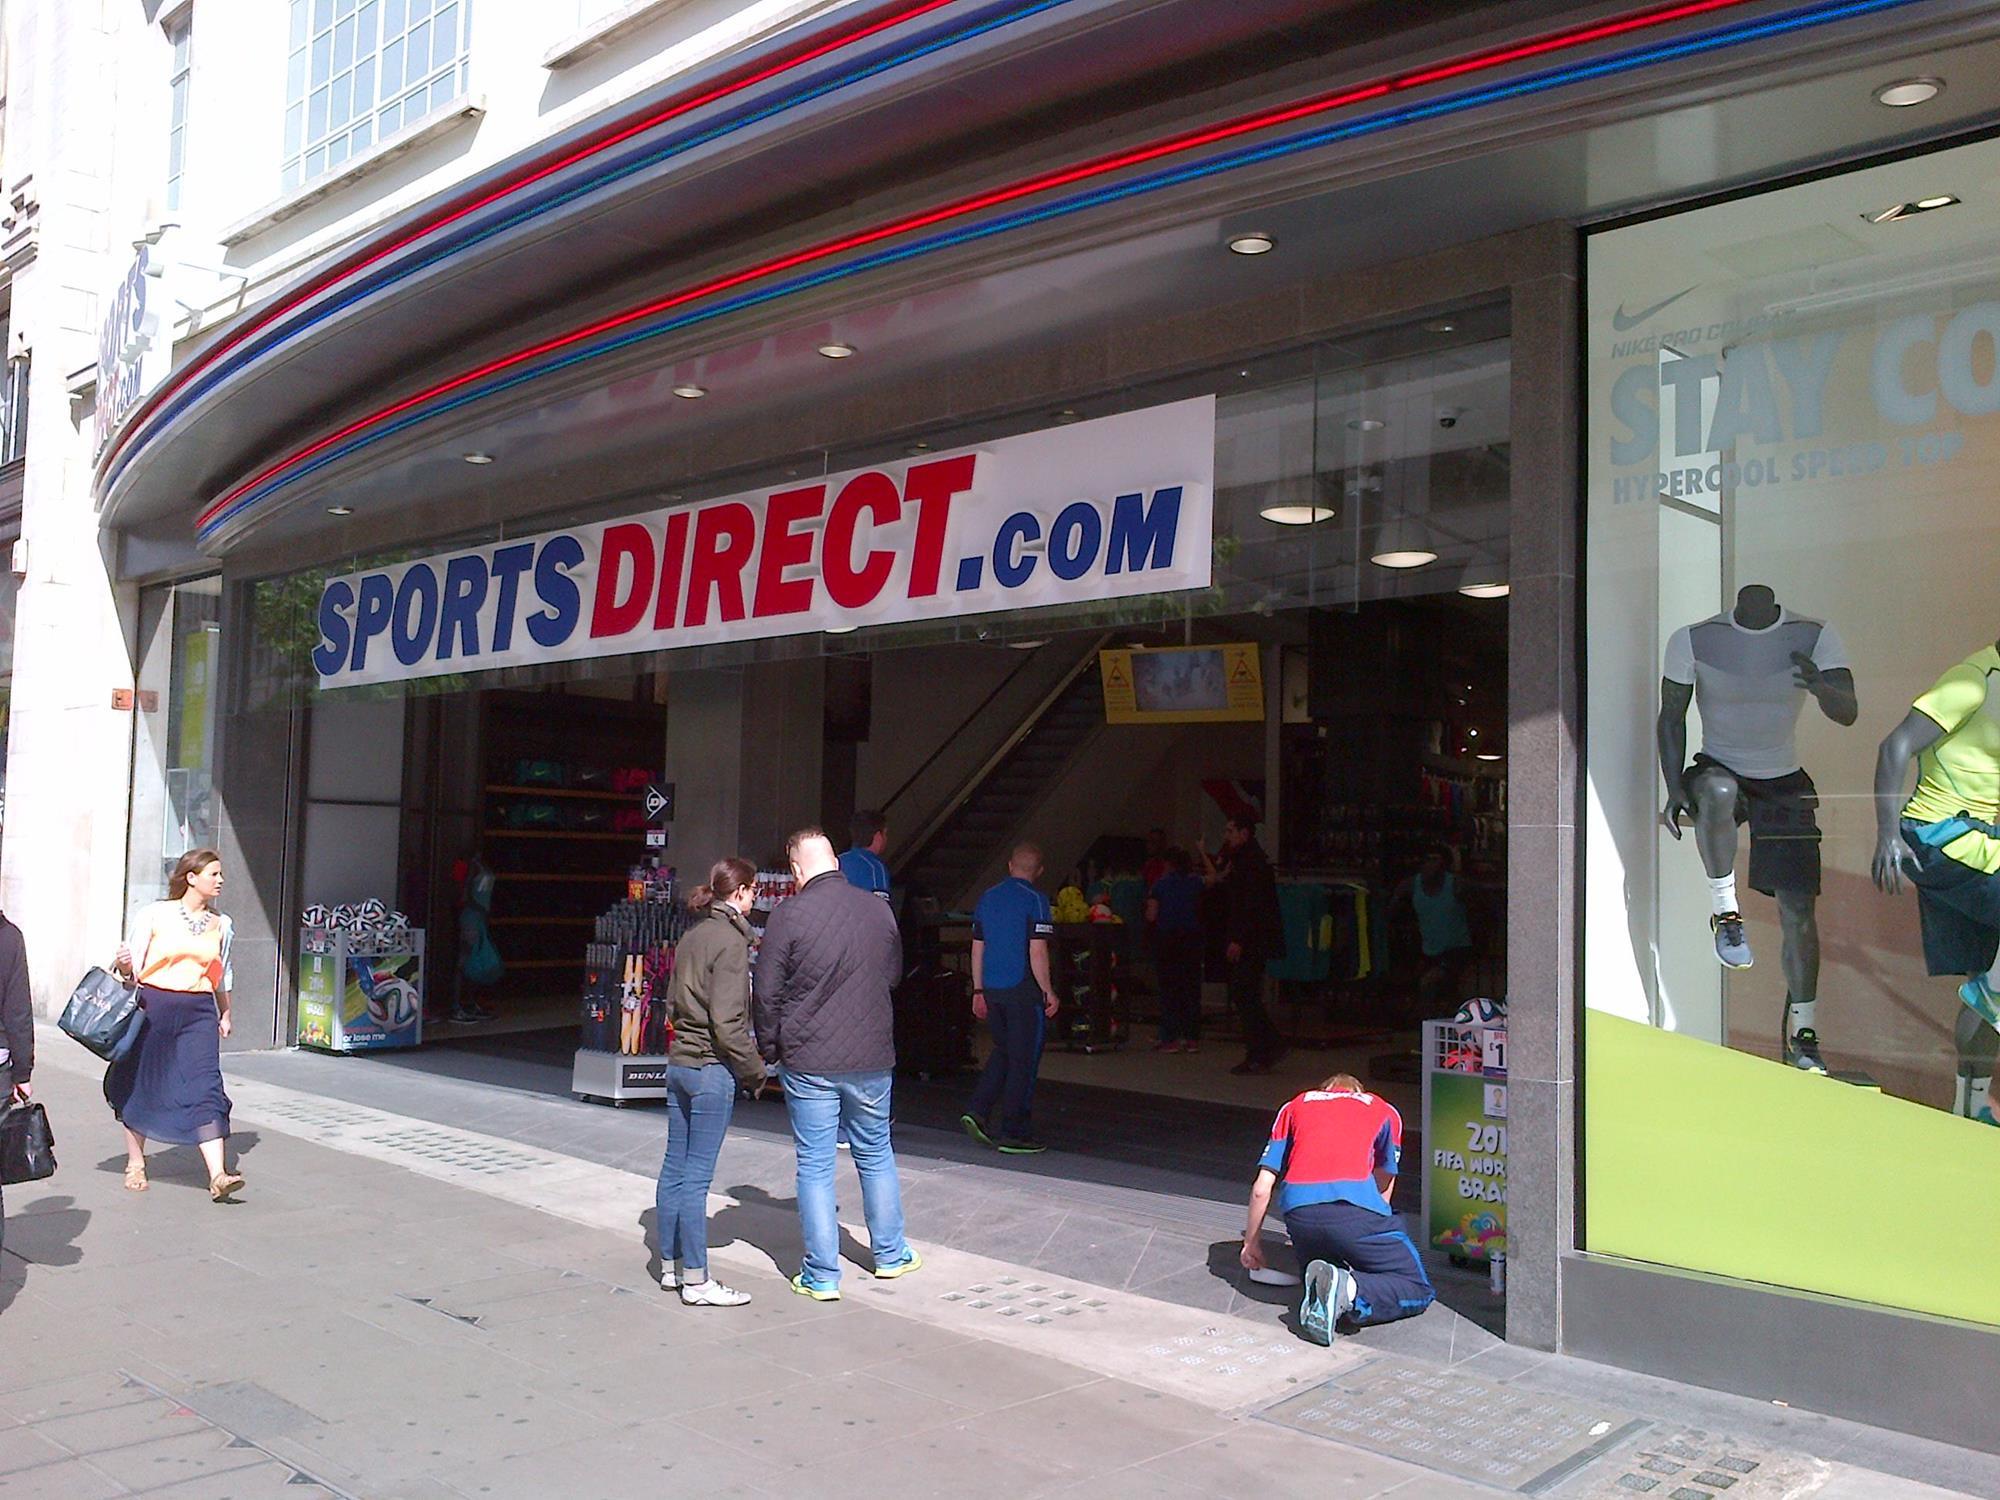 In pictures: Sports Direct opens Oxford Street flagship